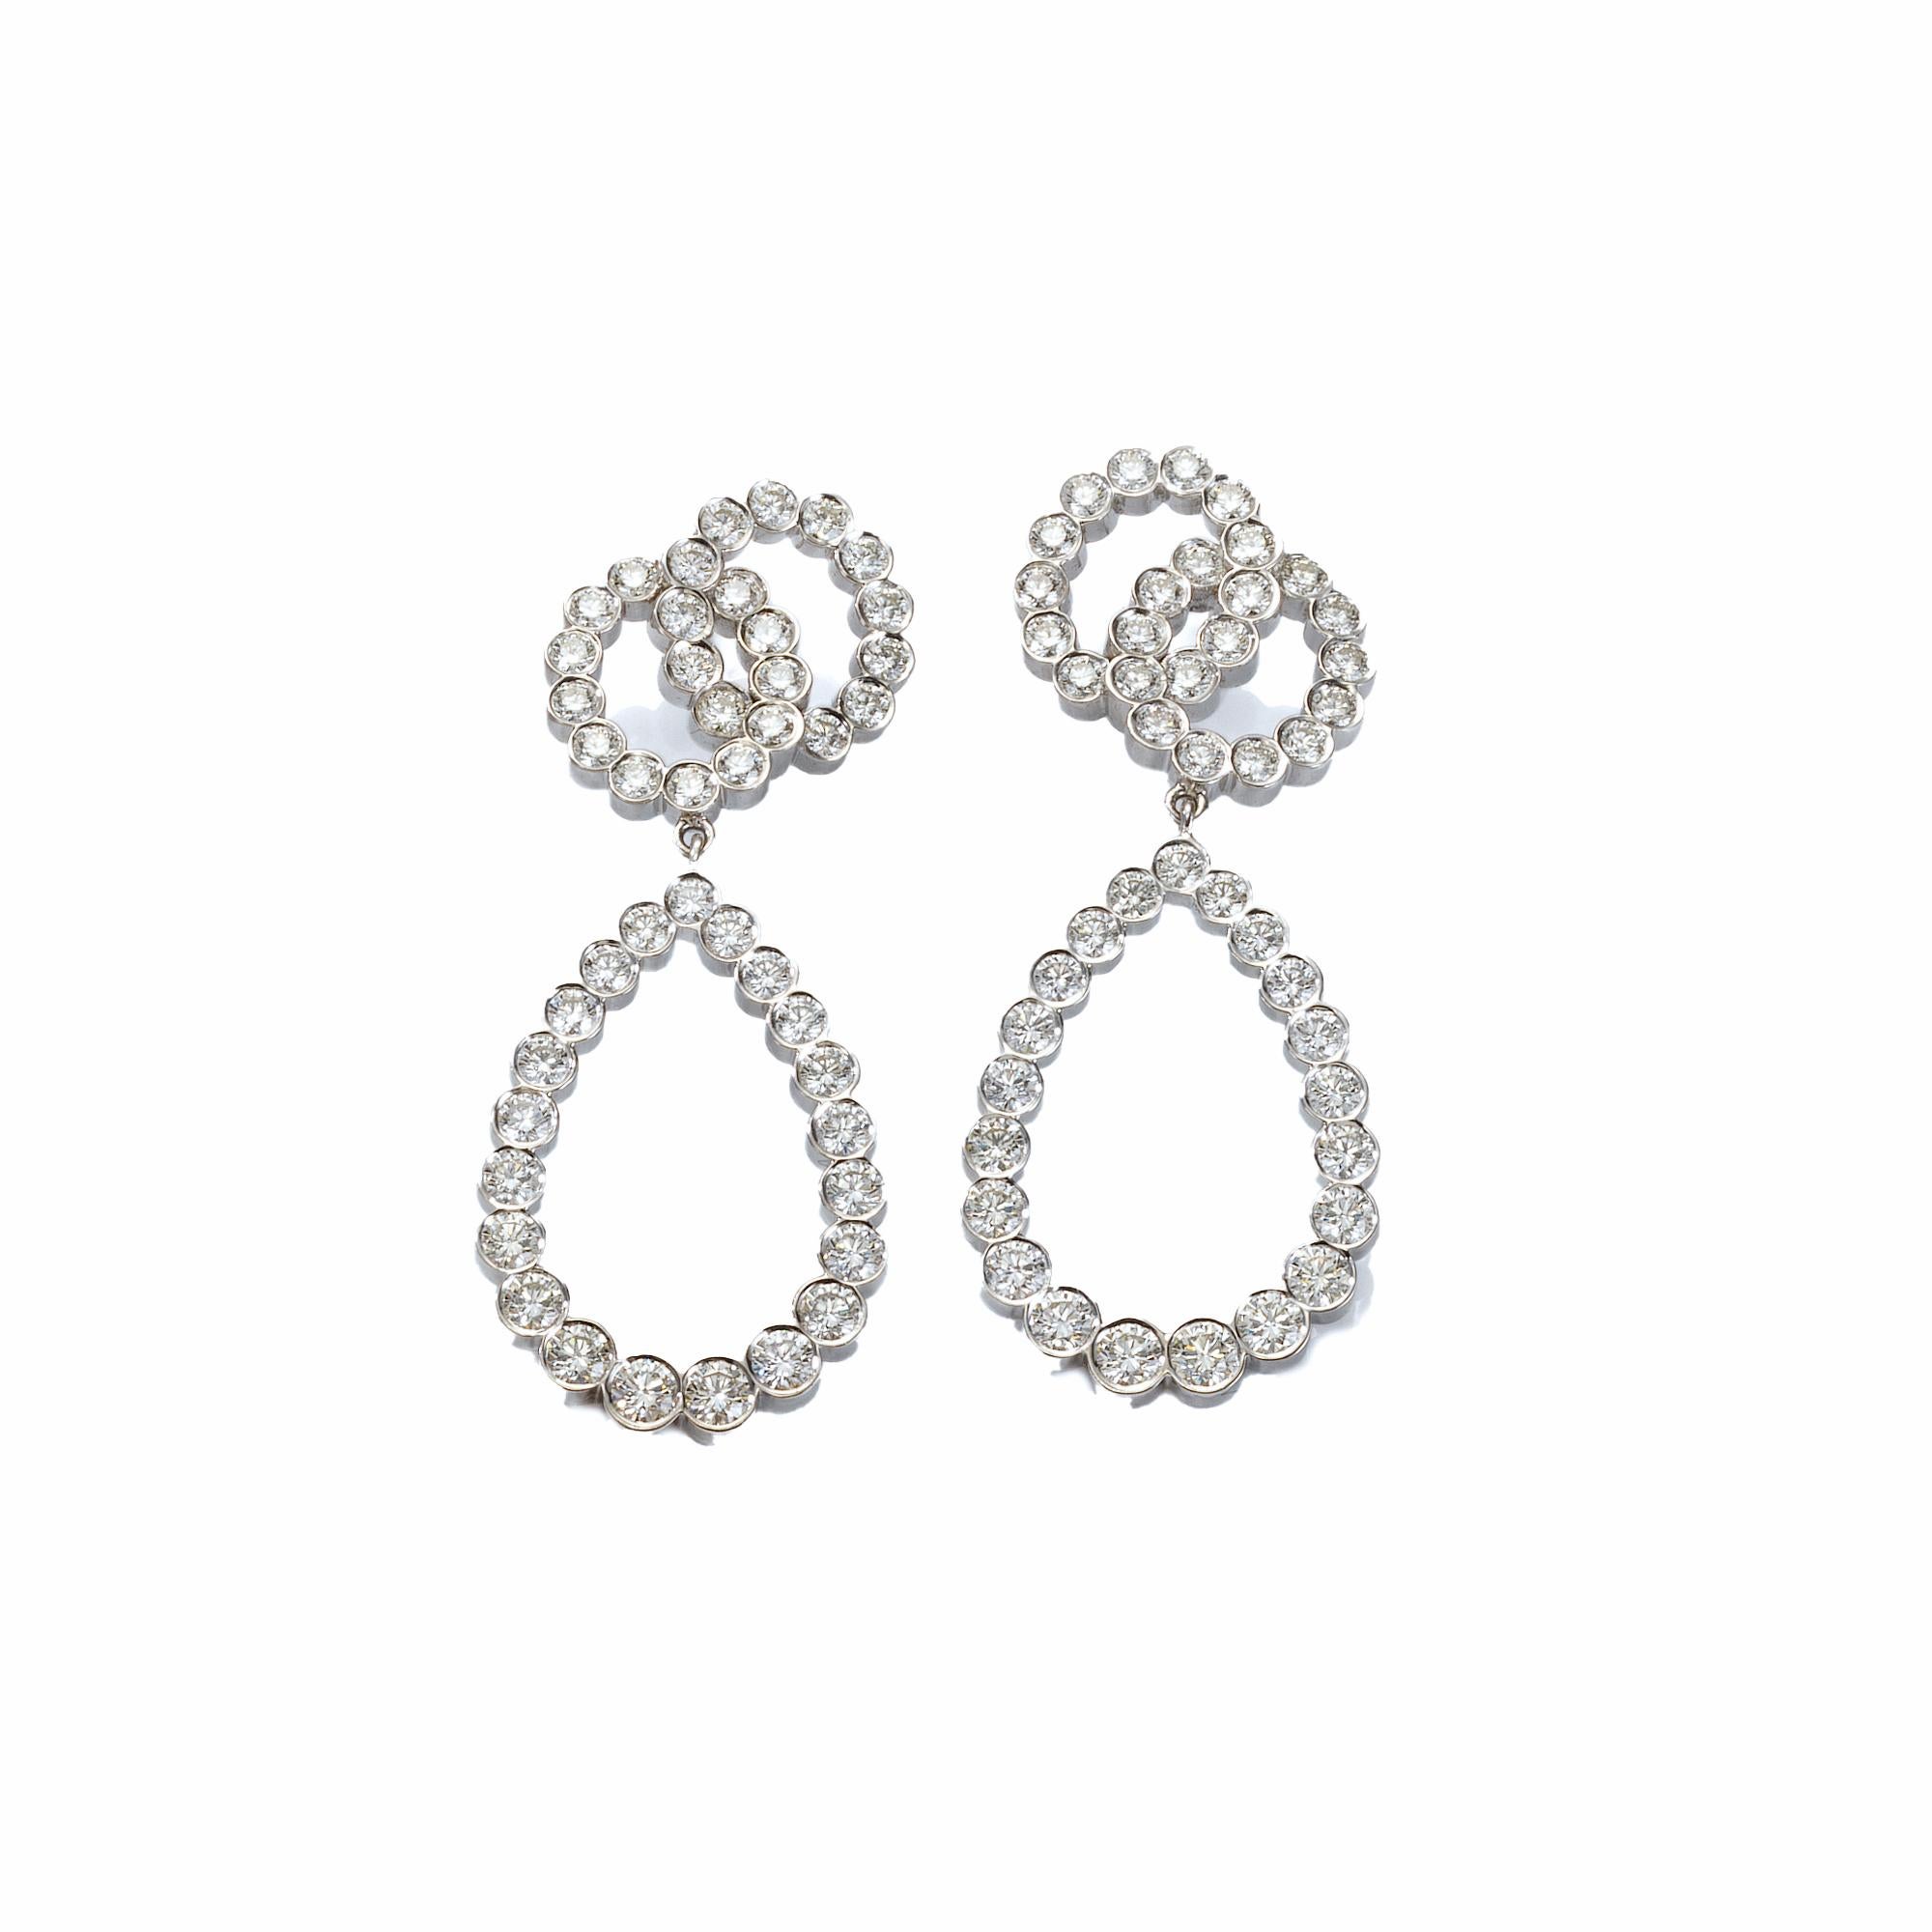 90 Round Brilliant Cut Diamonds a total of 4.98 carats set in 18k white gold dangle earrings.
Also available in rose gold.
